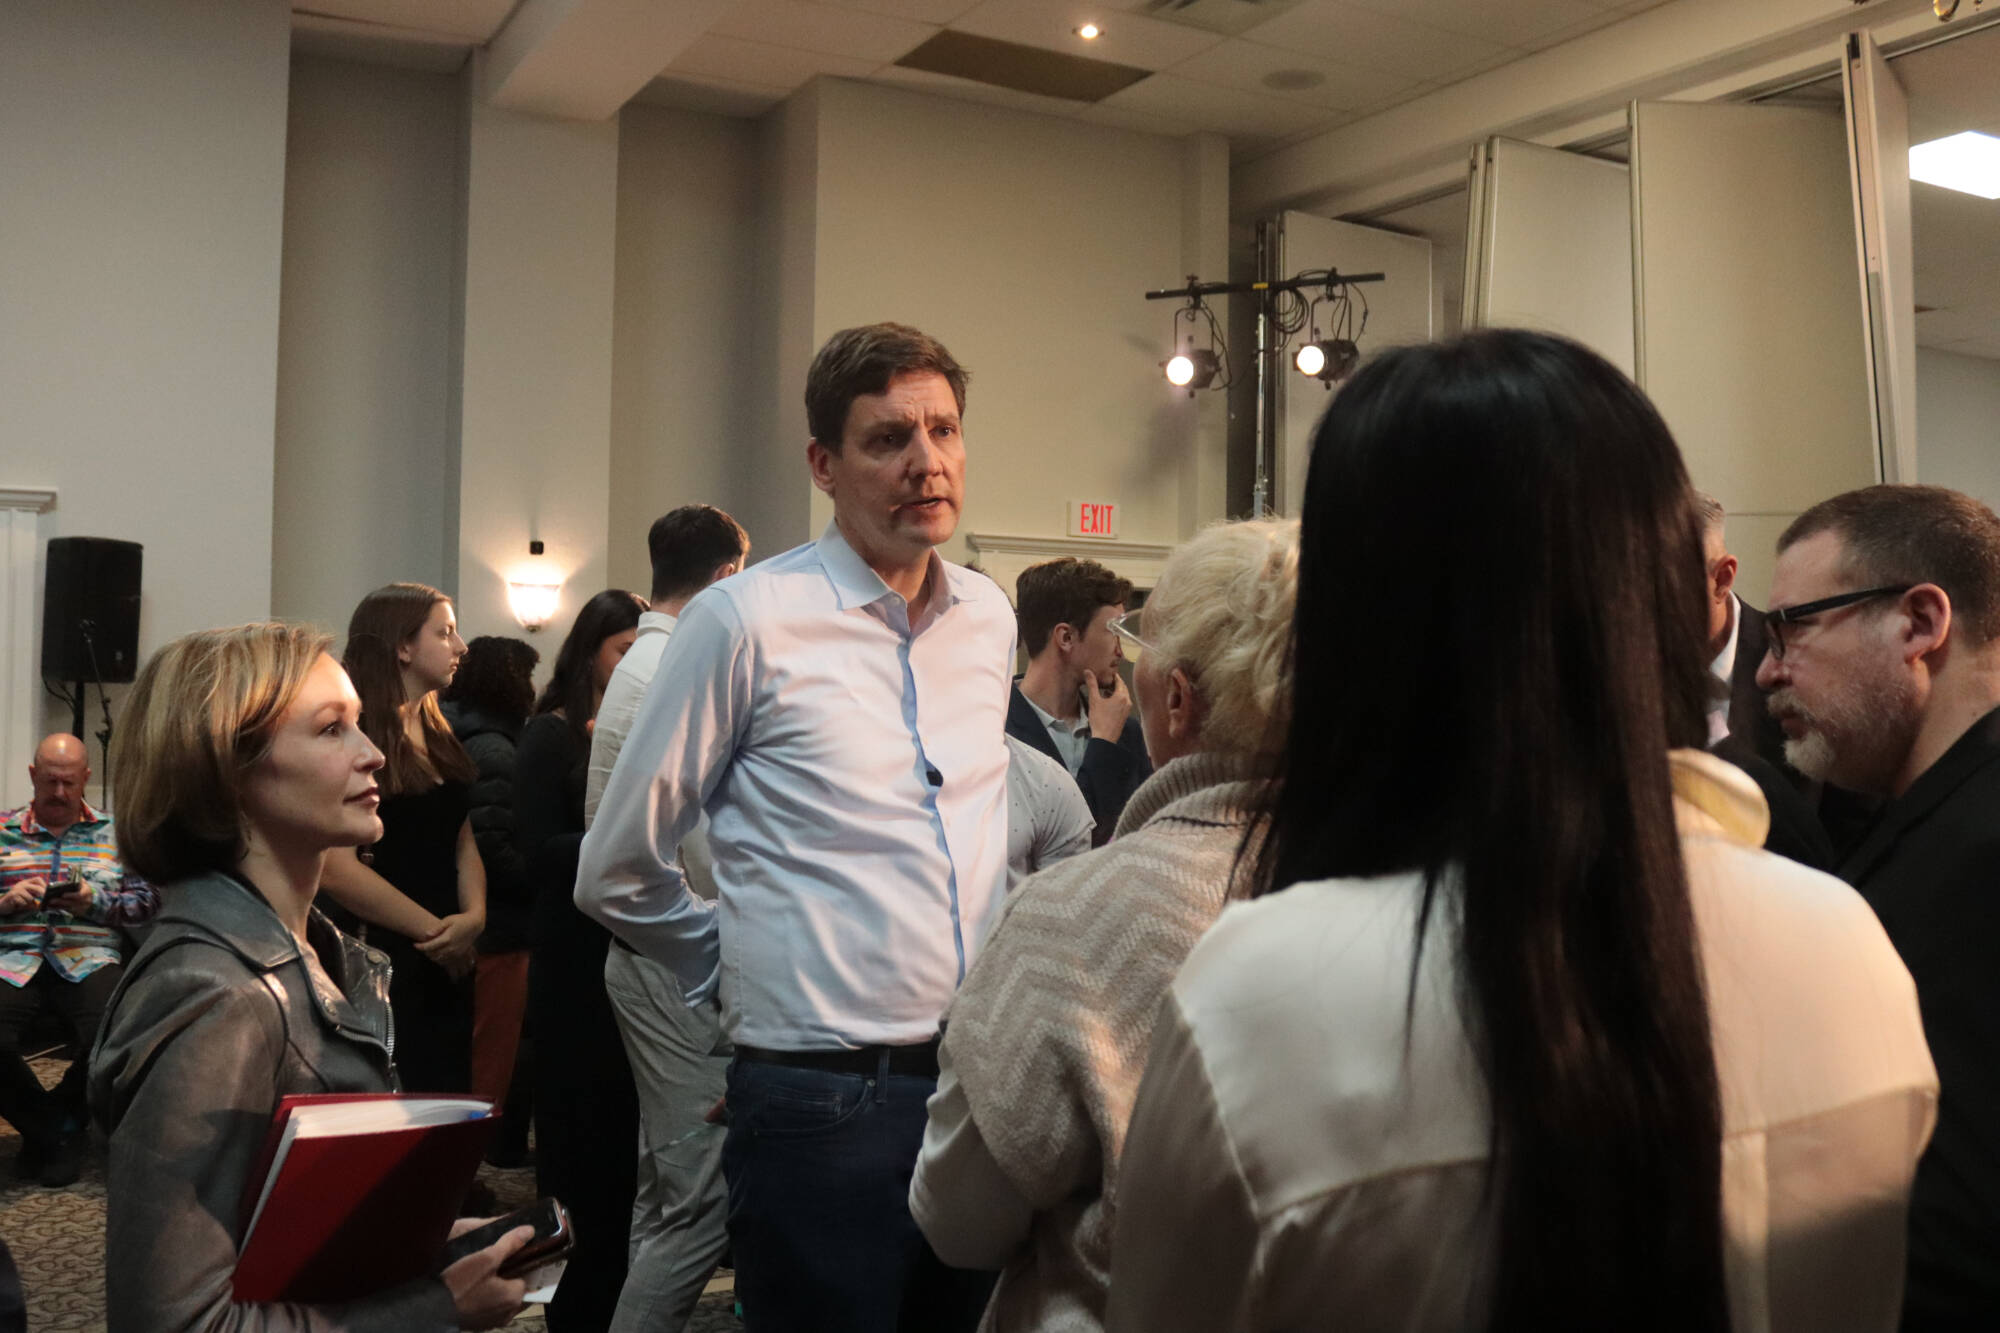 B.C. Premier David Eby talks housing, healthcare and more in Vernon -  Summerland Review